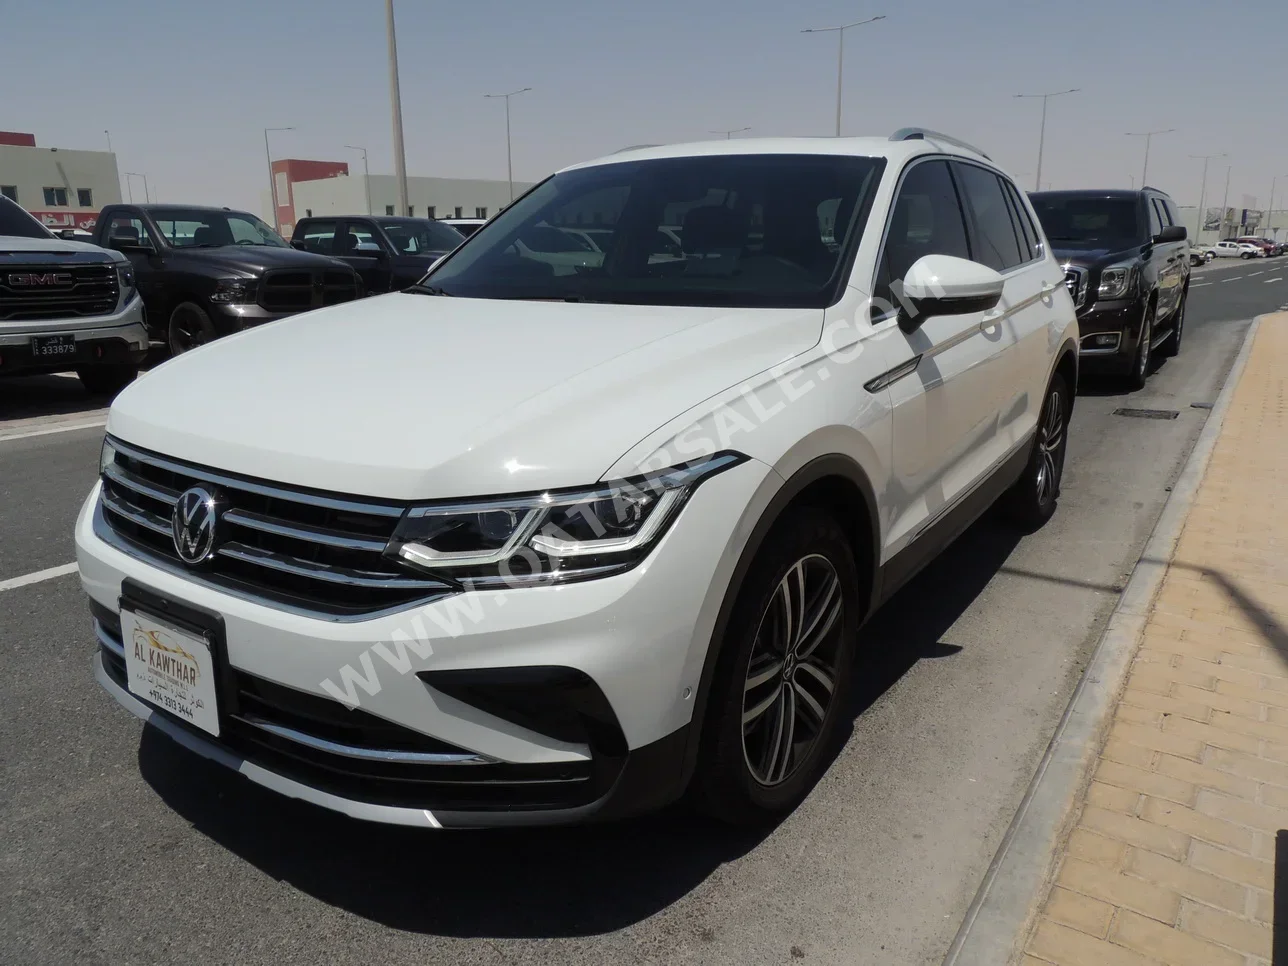 Volkswagen  Tiguan  2024  Automatic  500 Km  4 Cylinder  Four Wheel Drive (4WD)  SUV  White  With Warranty